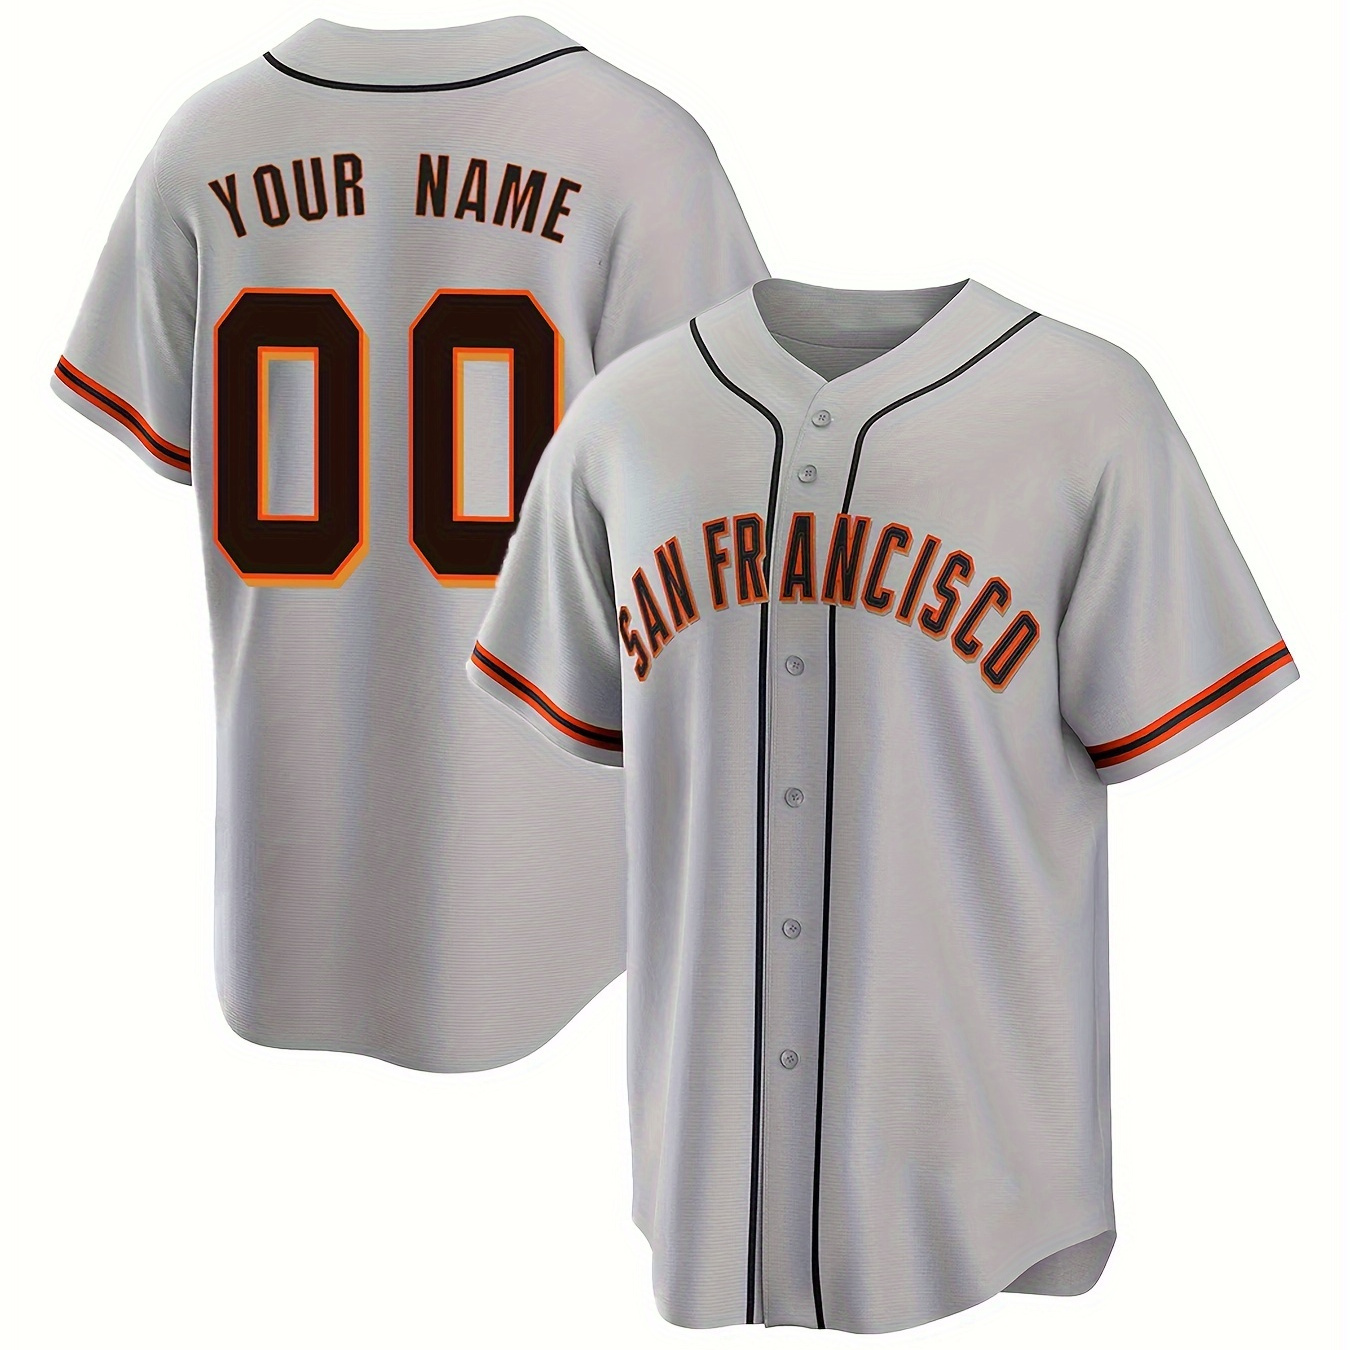 

Men's Customizable Name And Number Design Baseball Jersey Shirt, San Francisco Print Men's Embroidered Leisure Outdoor Sports Sweat Shirt For Match Party Training